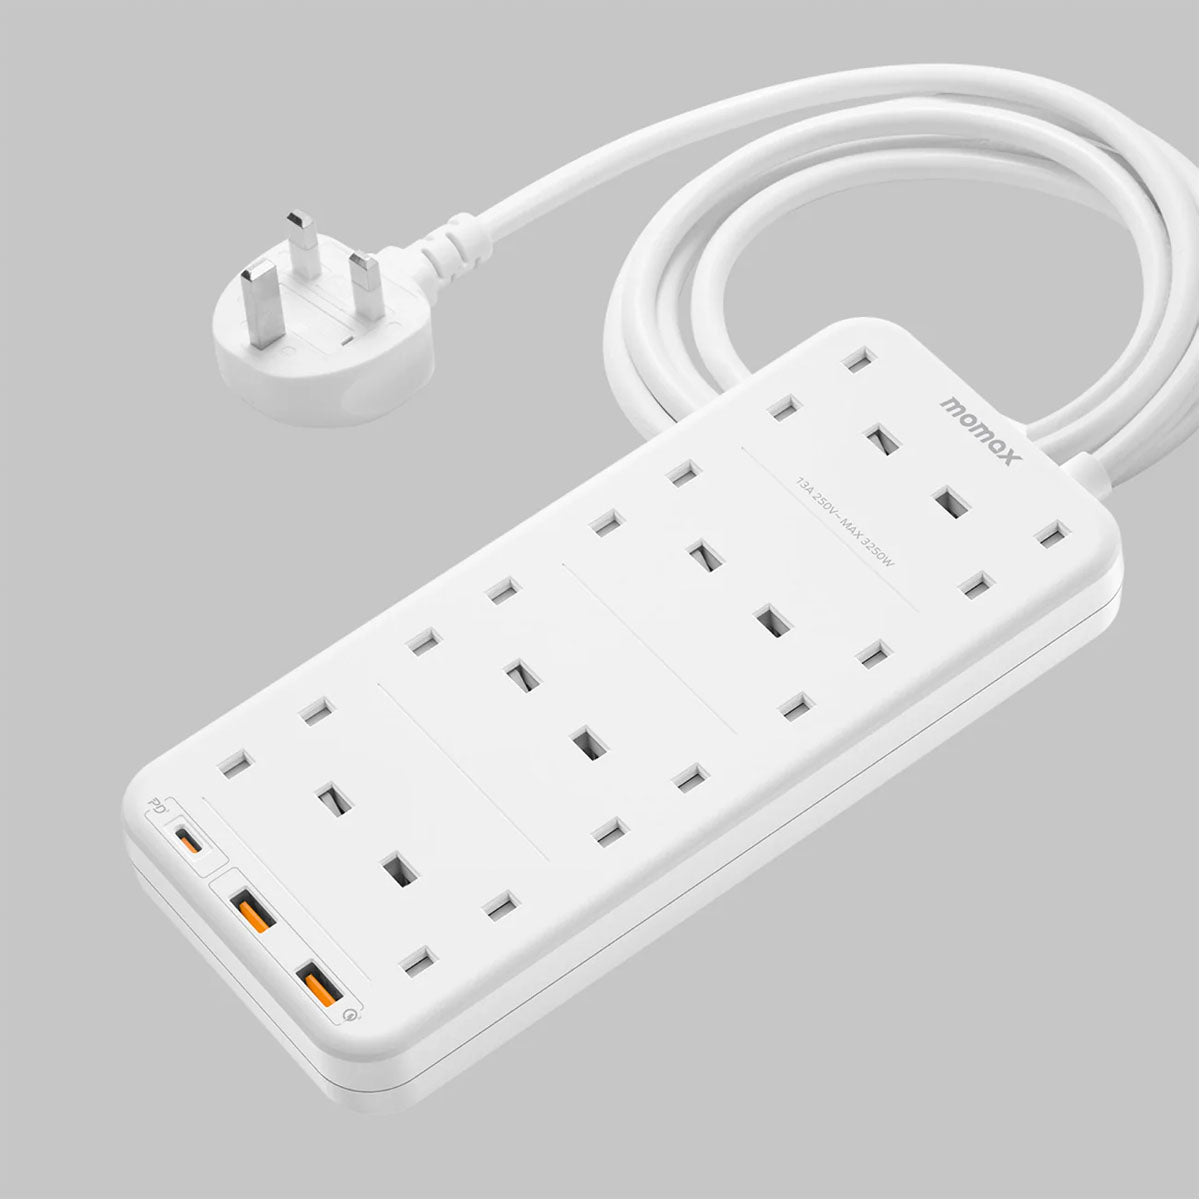 Momax ONEPLUG 8-Outlet Power Strip with USB (US5UK)